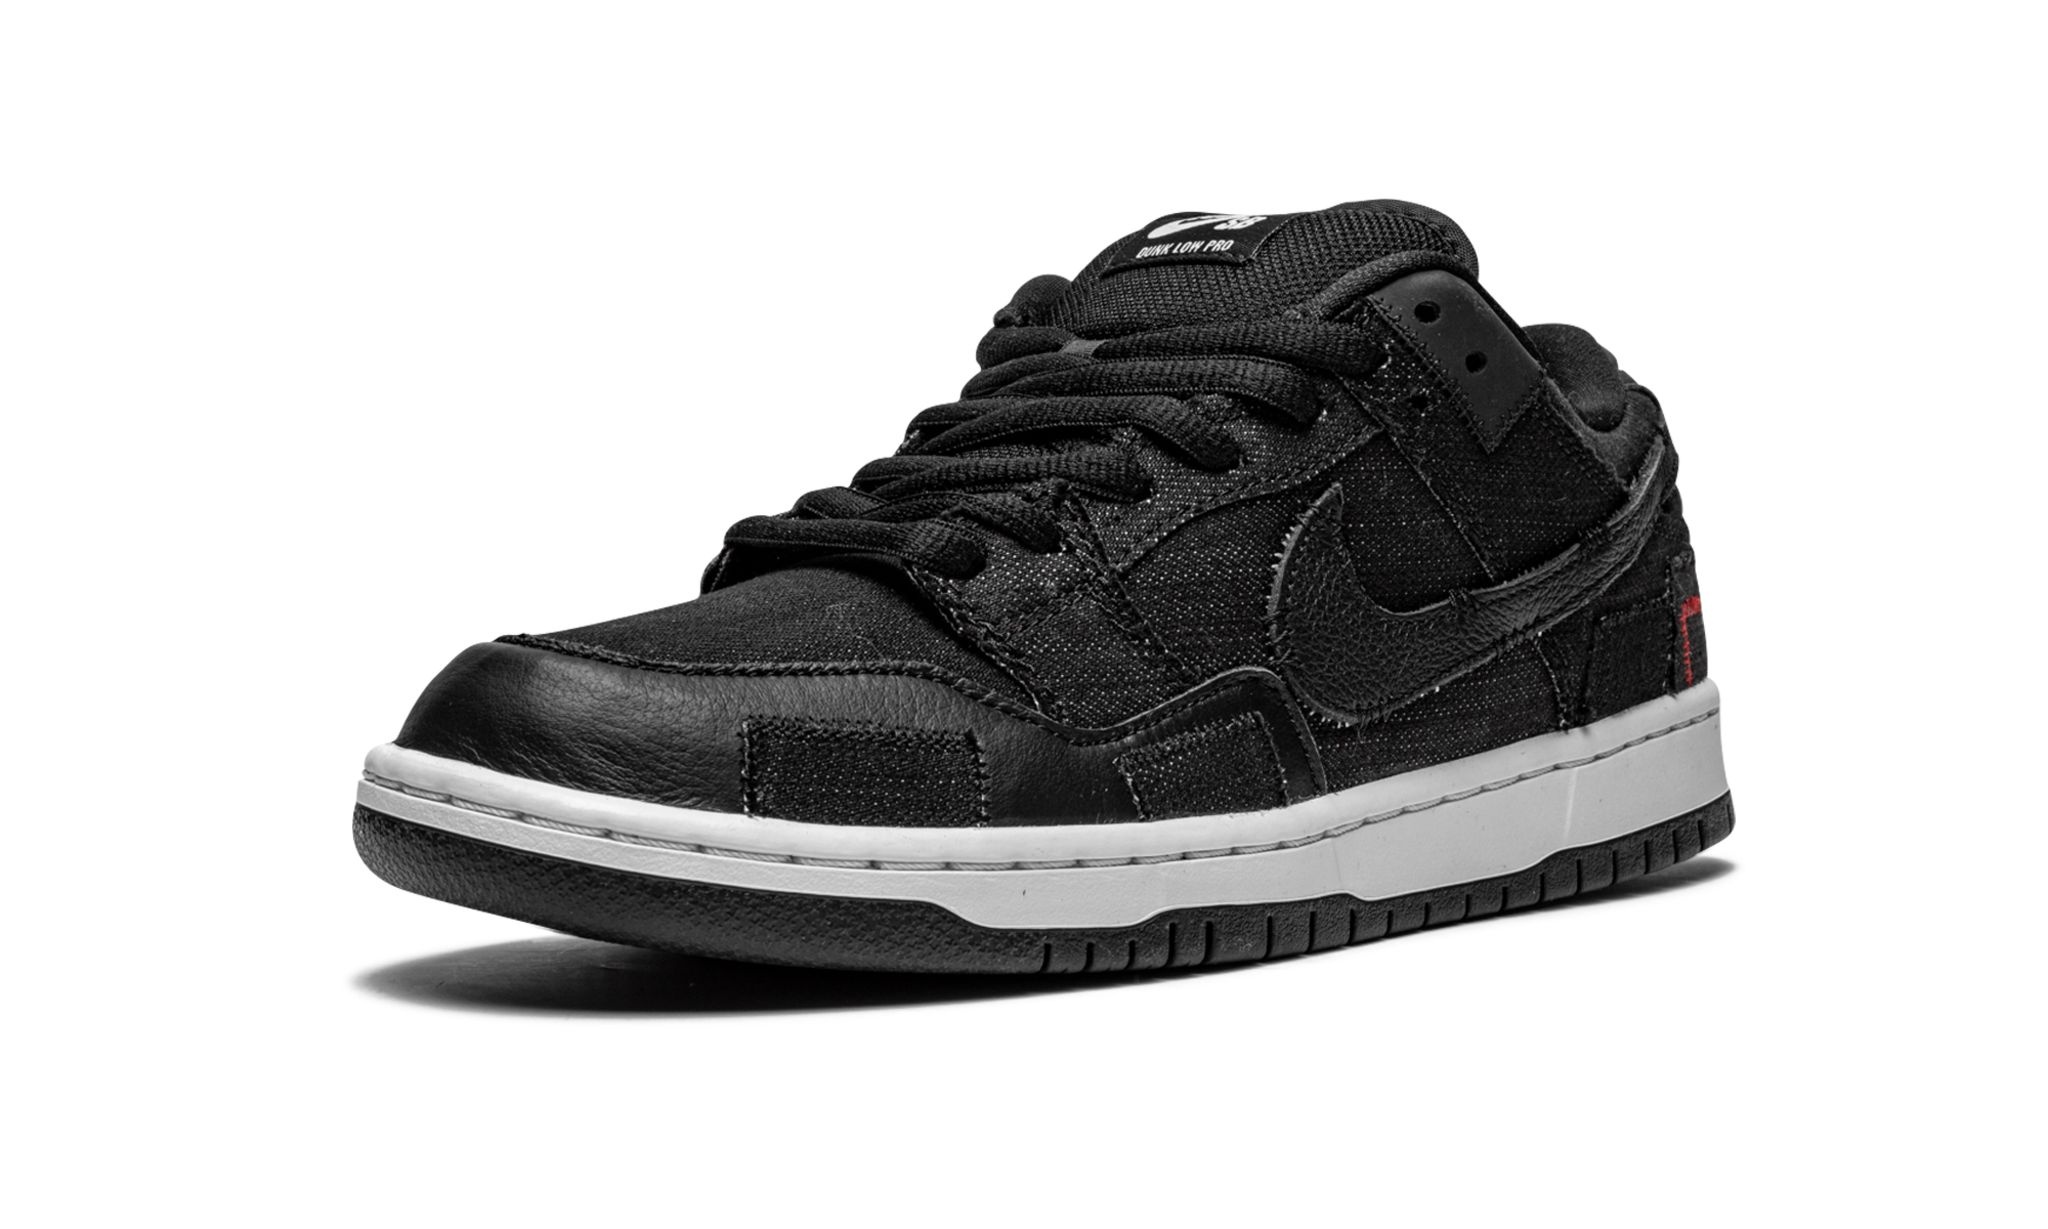 SB Dunk Low "Wasted Youth - Special Box" - 4